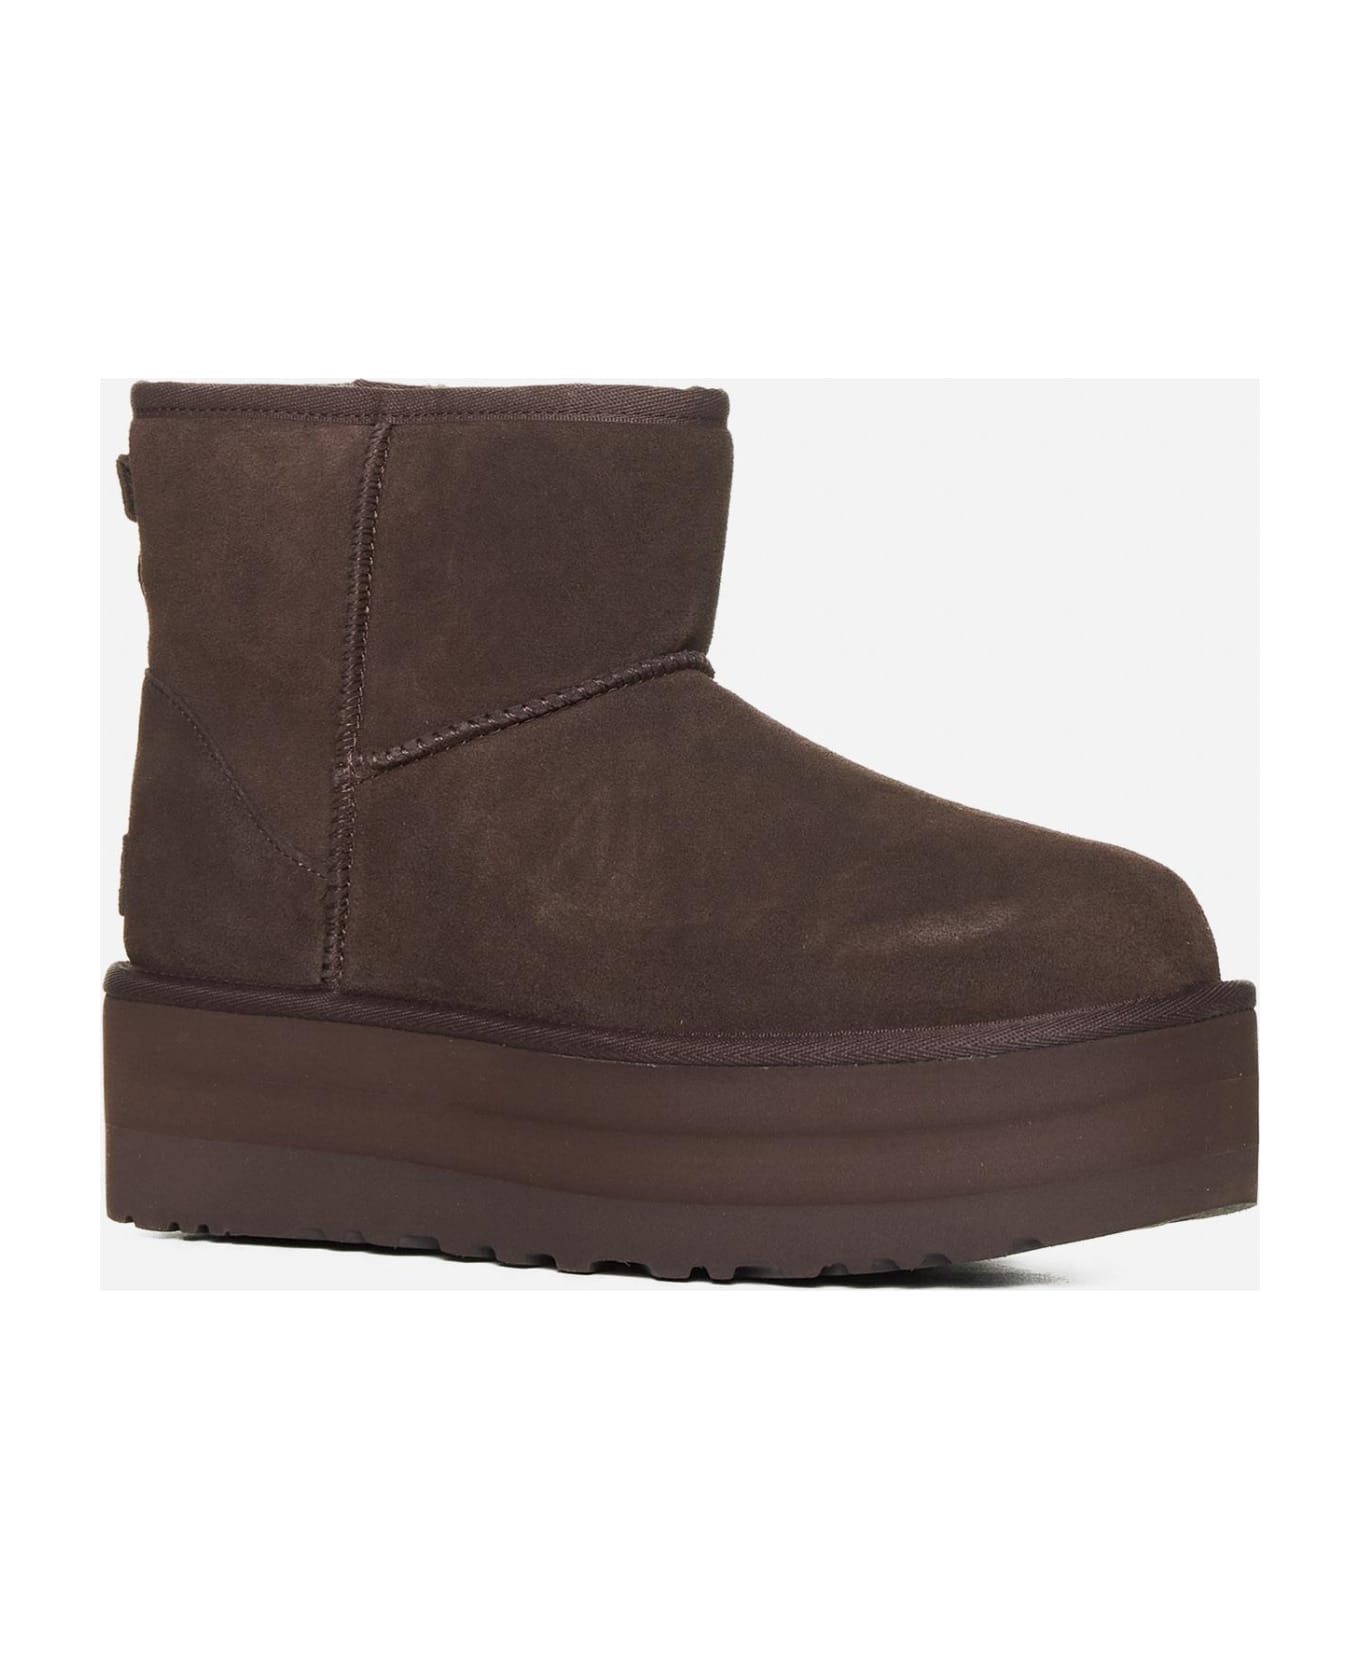 UGG Mini Classic Platform Suede Ankle Boots - Marrone